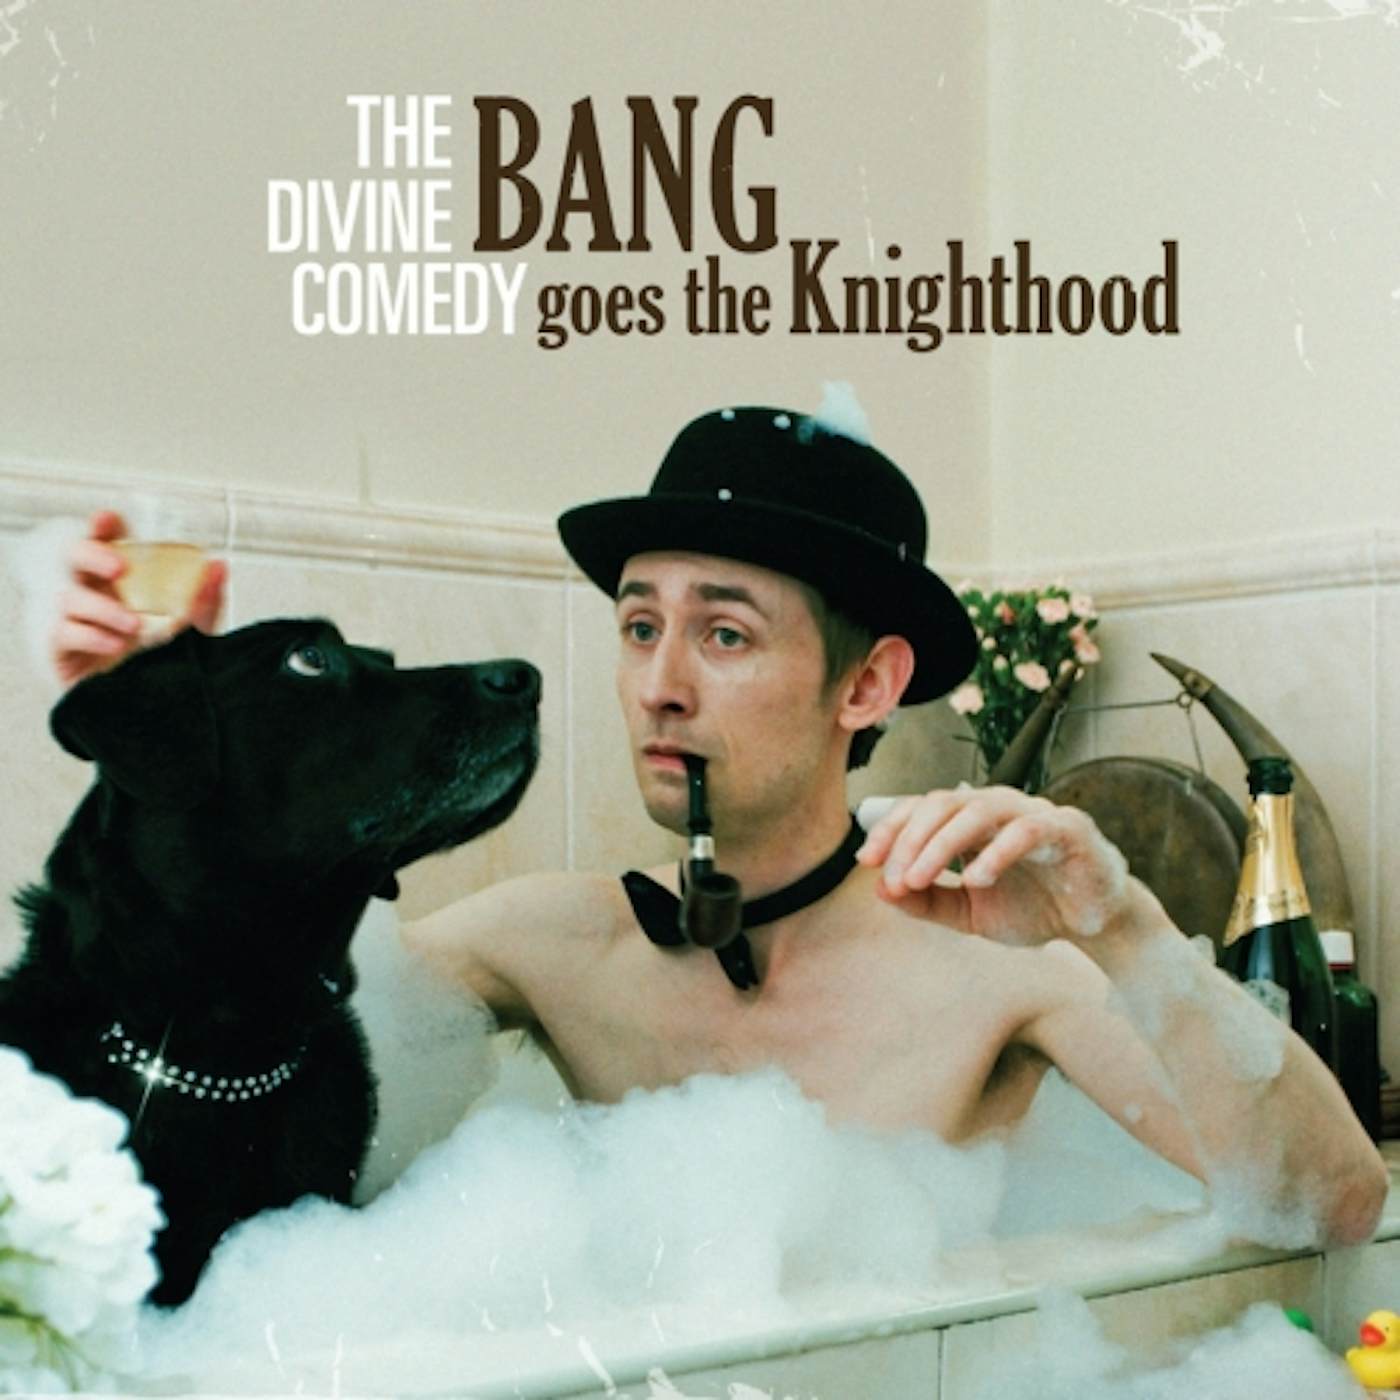 The Divine Comedy Bang Goes the Knighthood Vinyl Record